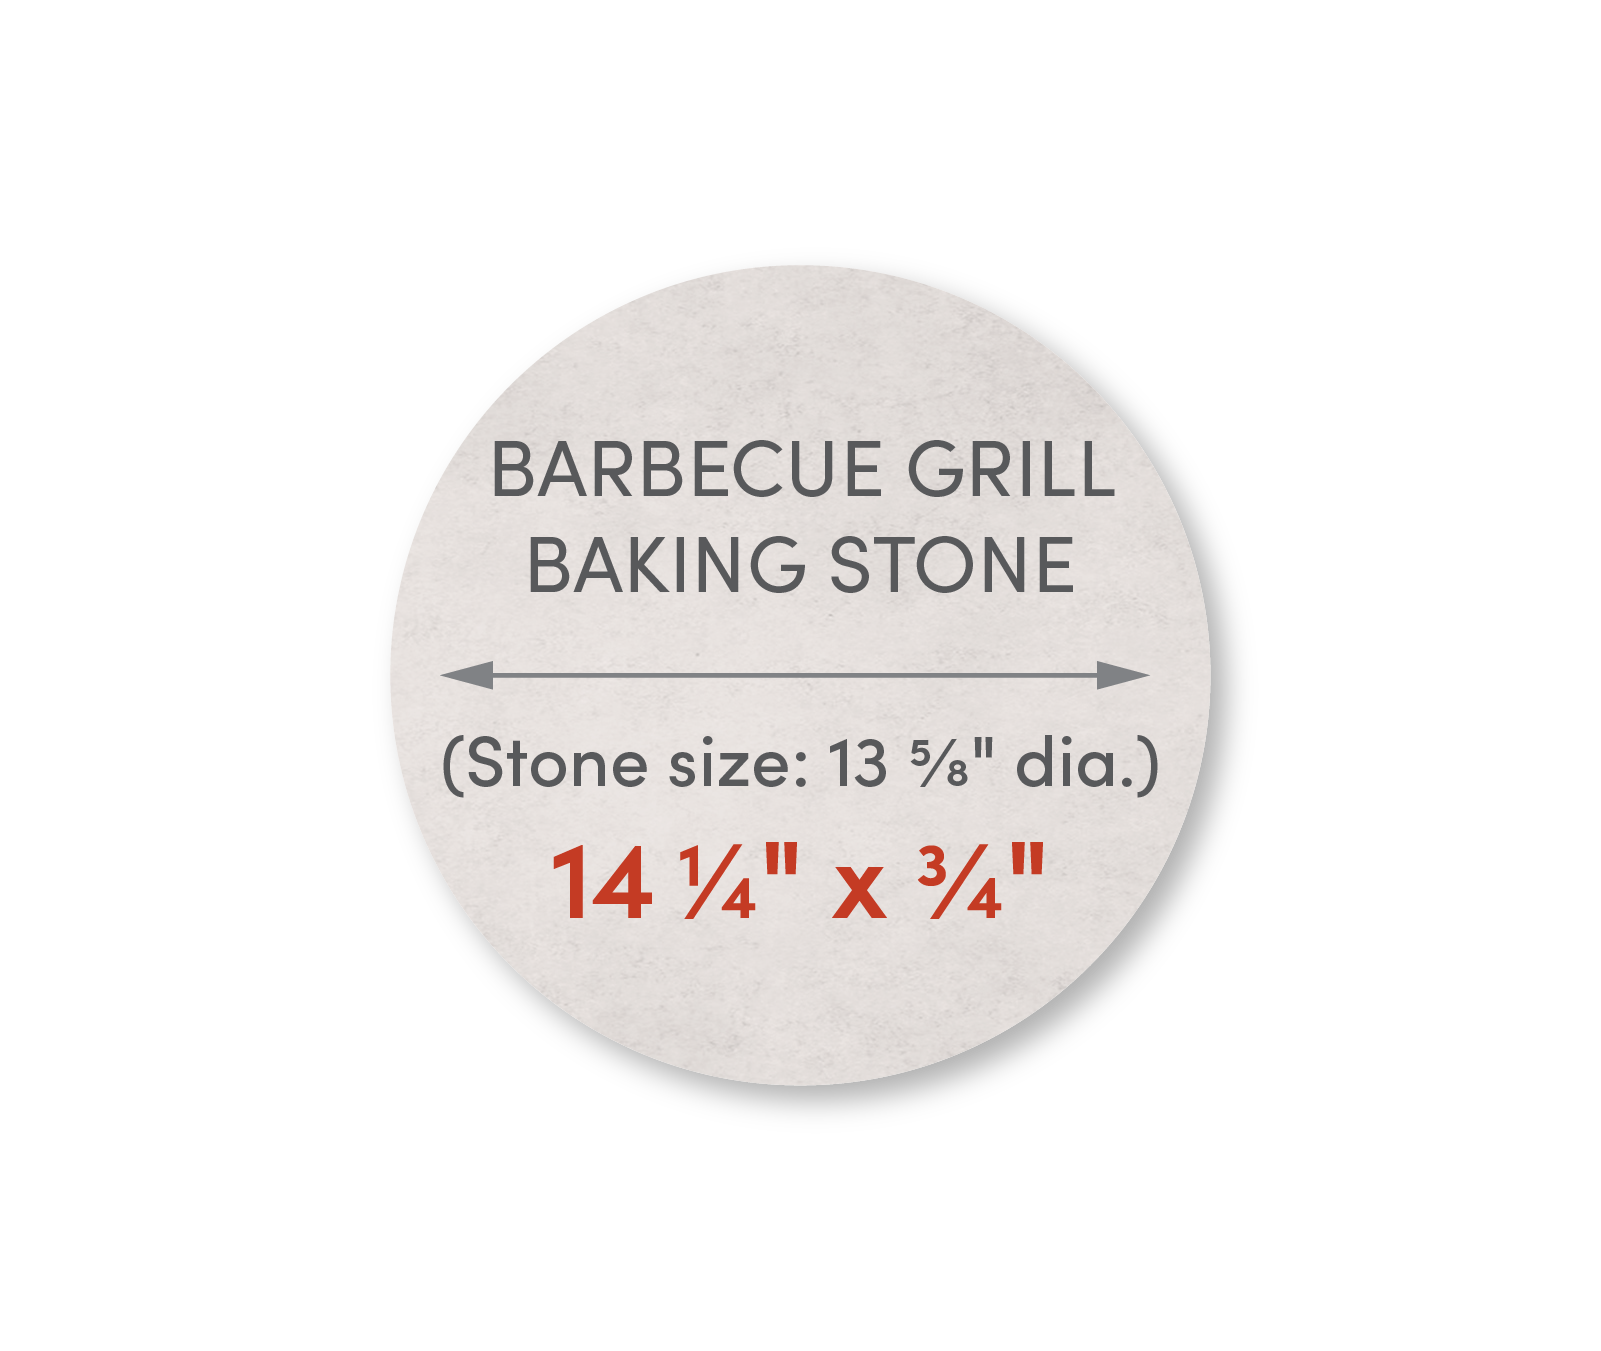 Home Barbecue Grill Baking Stone 14 1/4" Diameter